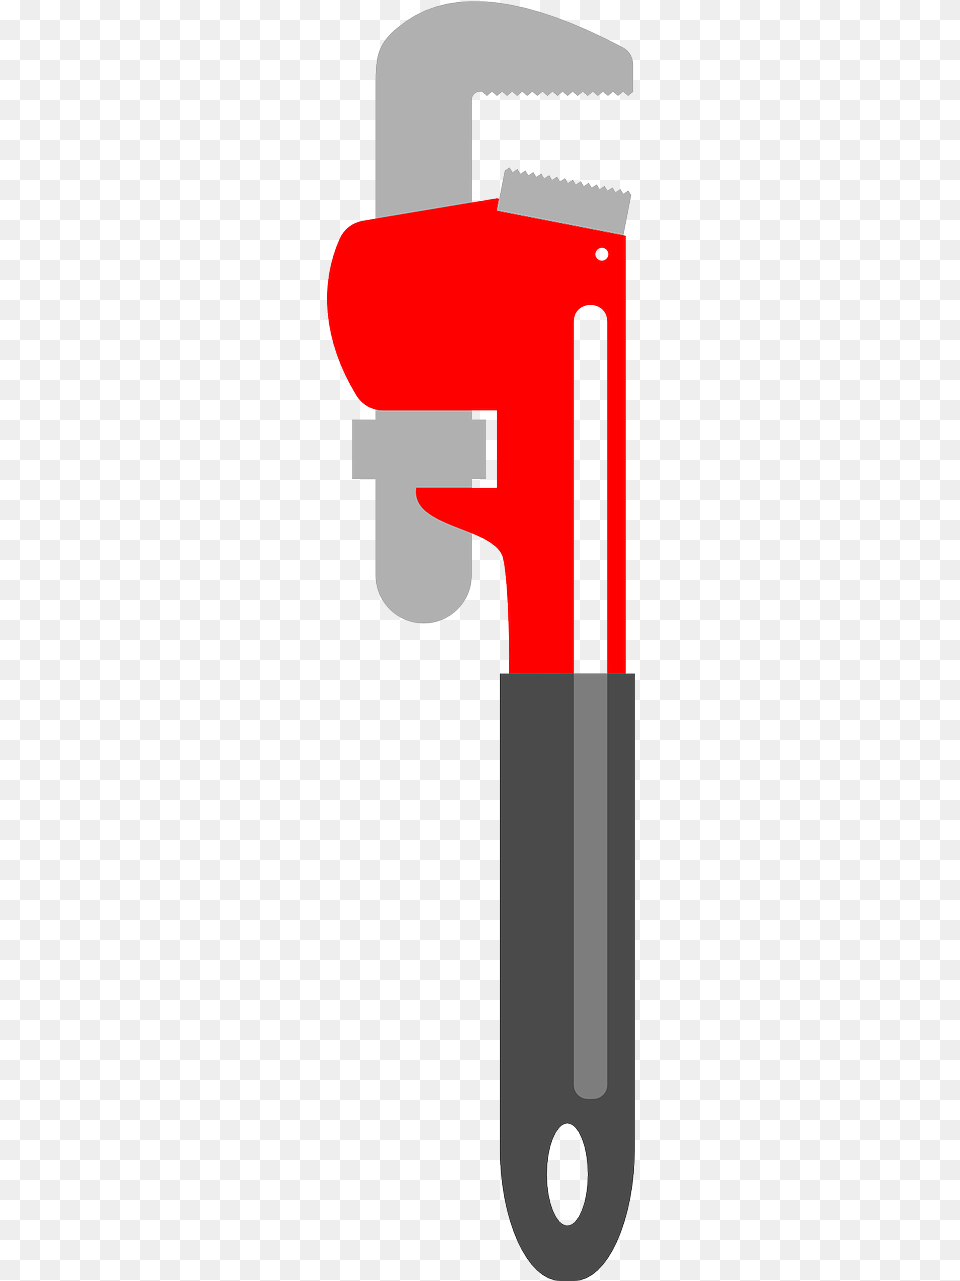 Pipe Wrench Pipe Tongs Image Pipe Wrench, Dynamite, Weapon Png